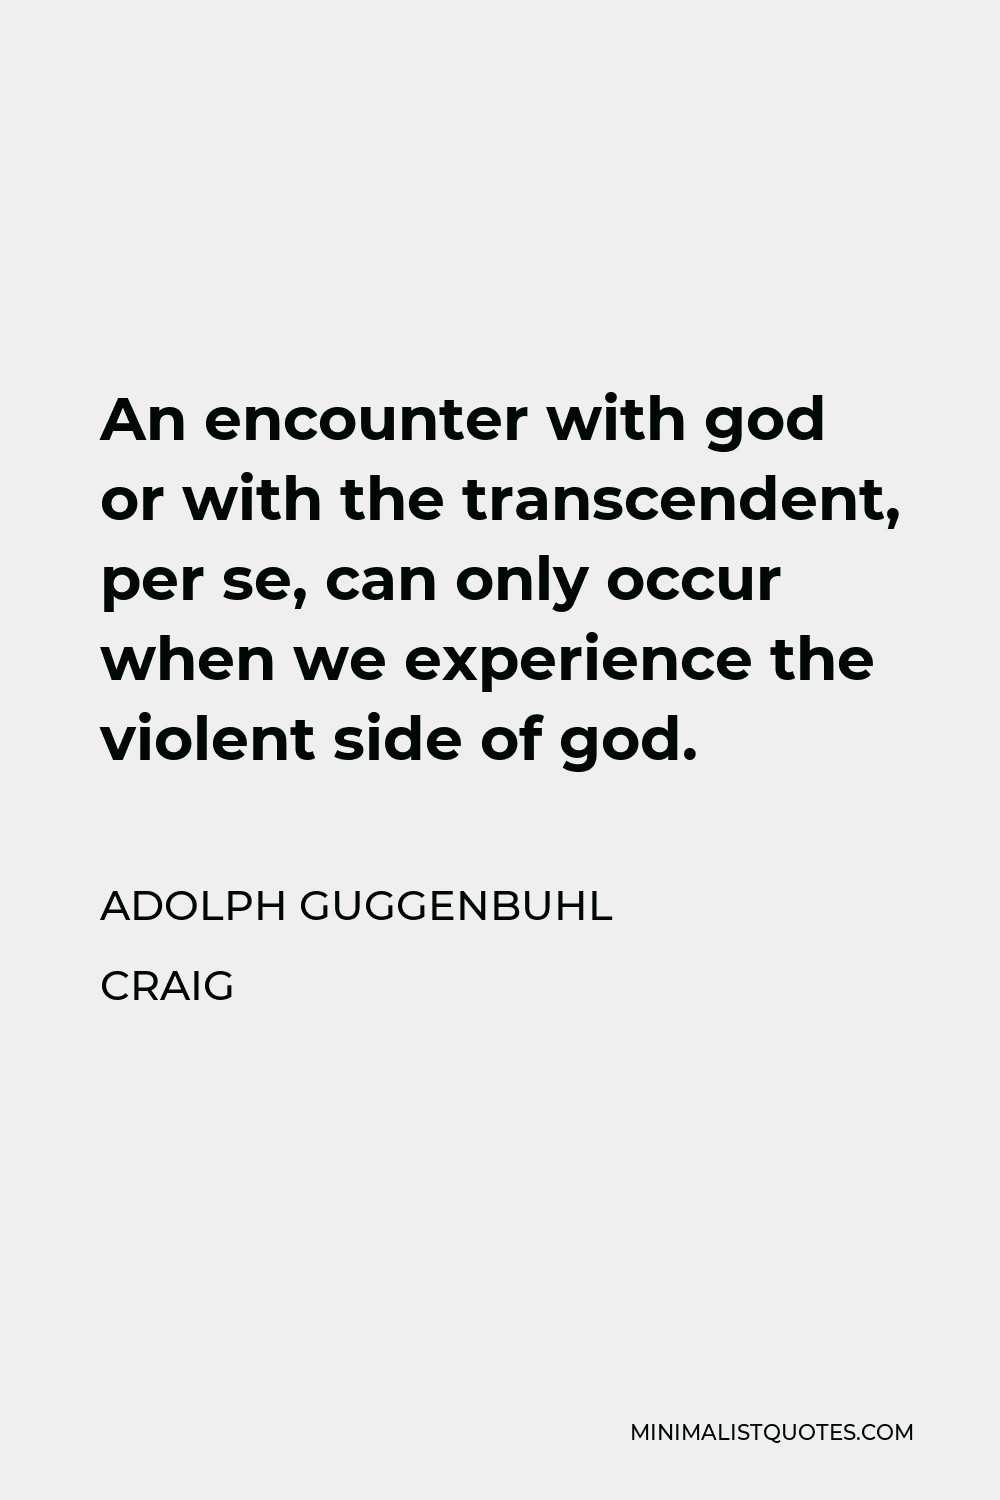 Adolph Guggenbuhl Craig Quote - An encounter with god or with the transcendent, per se, can only occur when we experience the violent side of god.